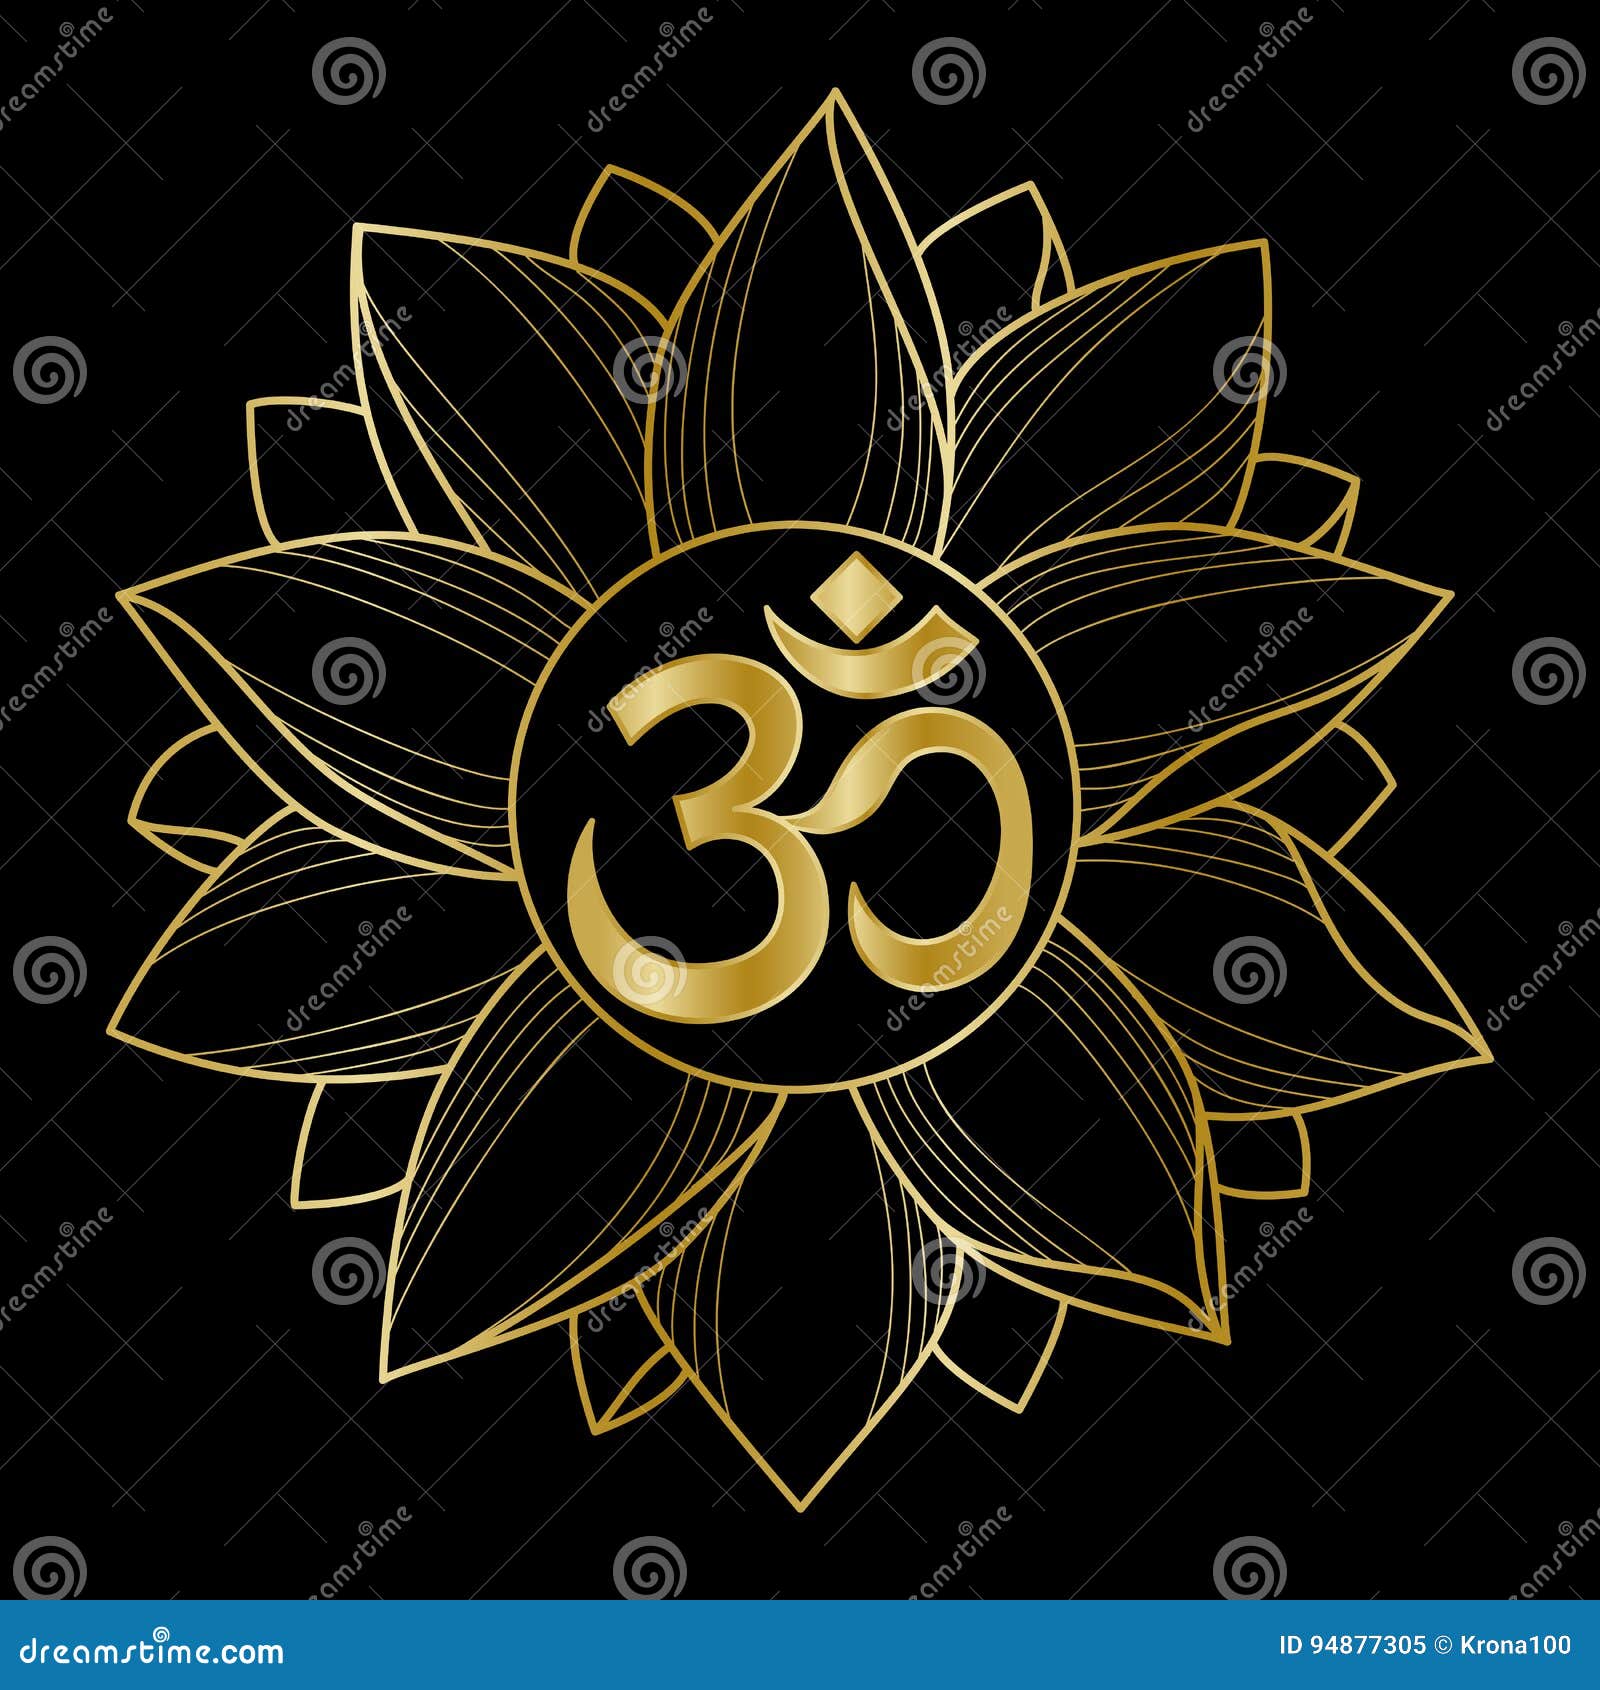 Gold Om and Lotus stock vector. Illustration of fashion - 94877305